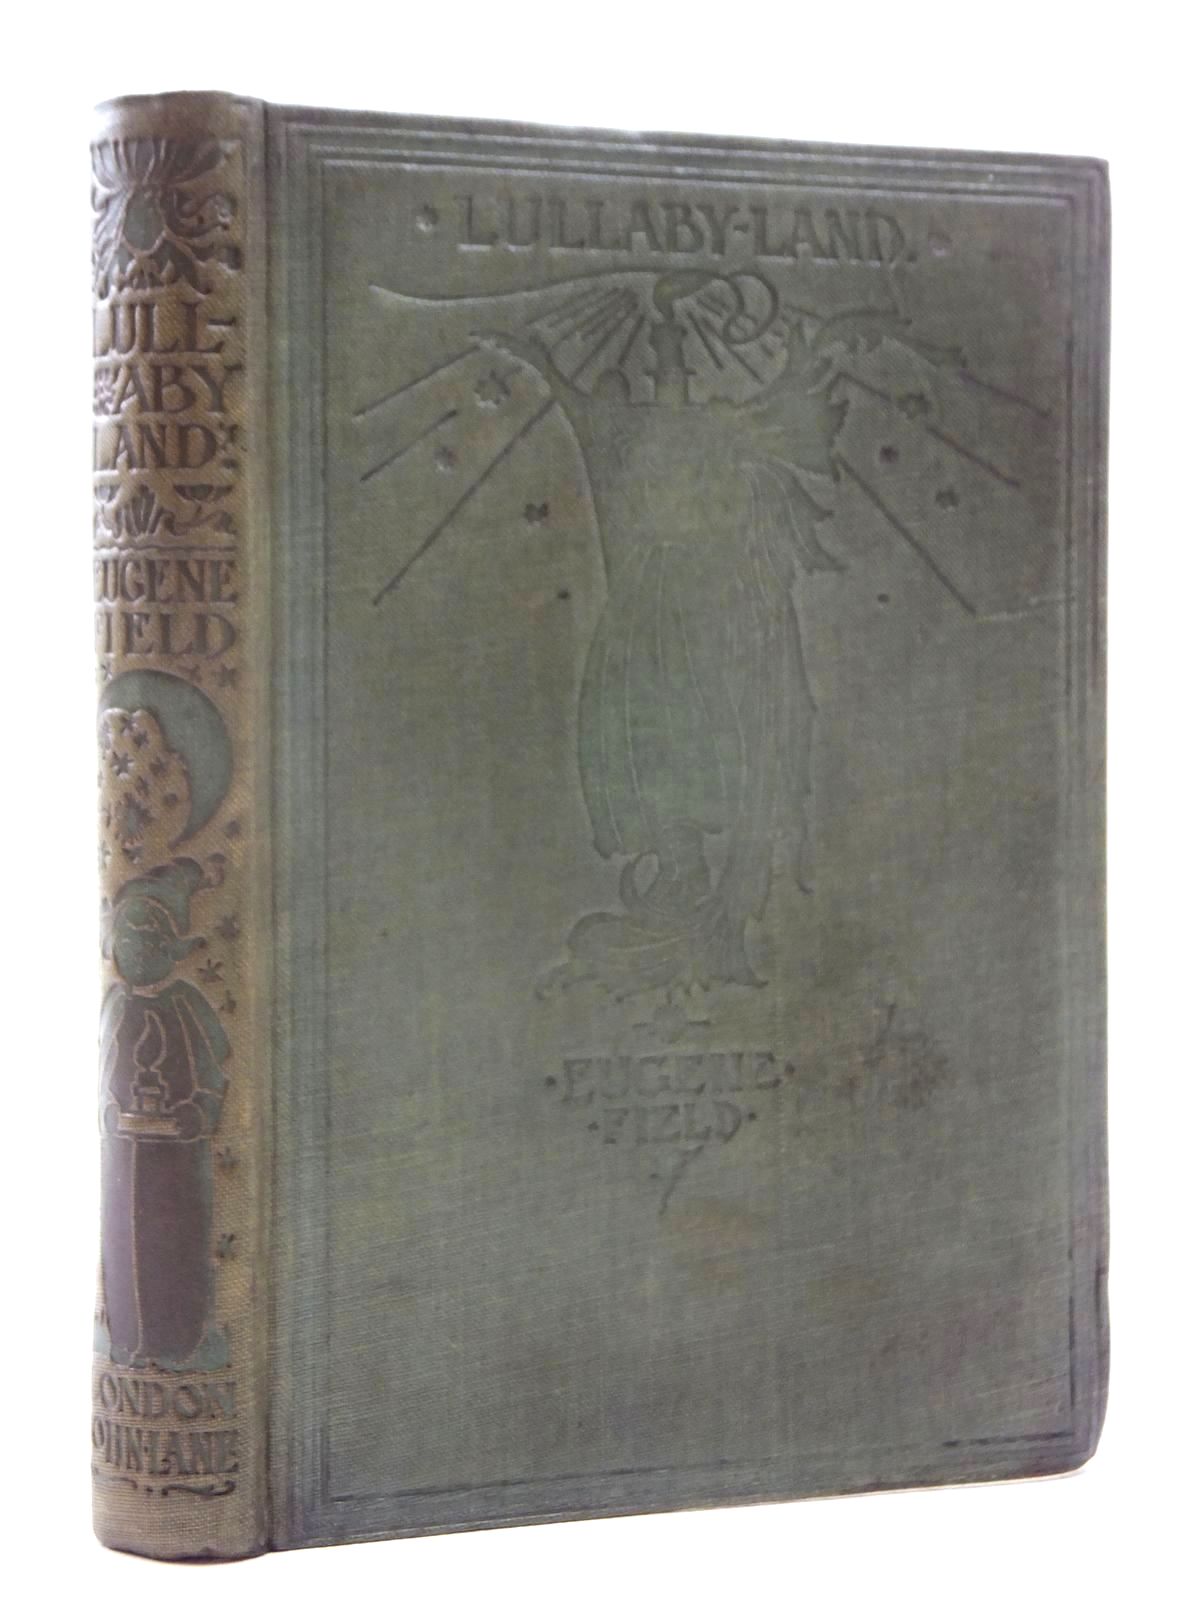 Photo of LULLABY-LAND written by Field, Eugene illustrated by Robinson, Charles published by John Lane The Bodley Head, Charles Scribner's Sons (STOCK CODE: 2124003)  for sale by Stella & Rose's Books